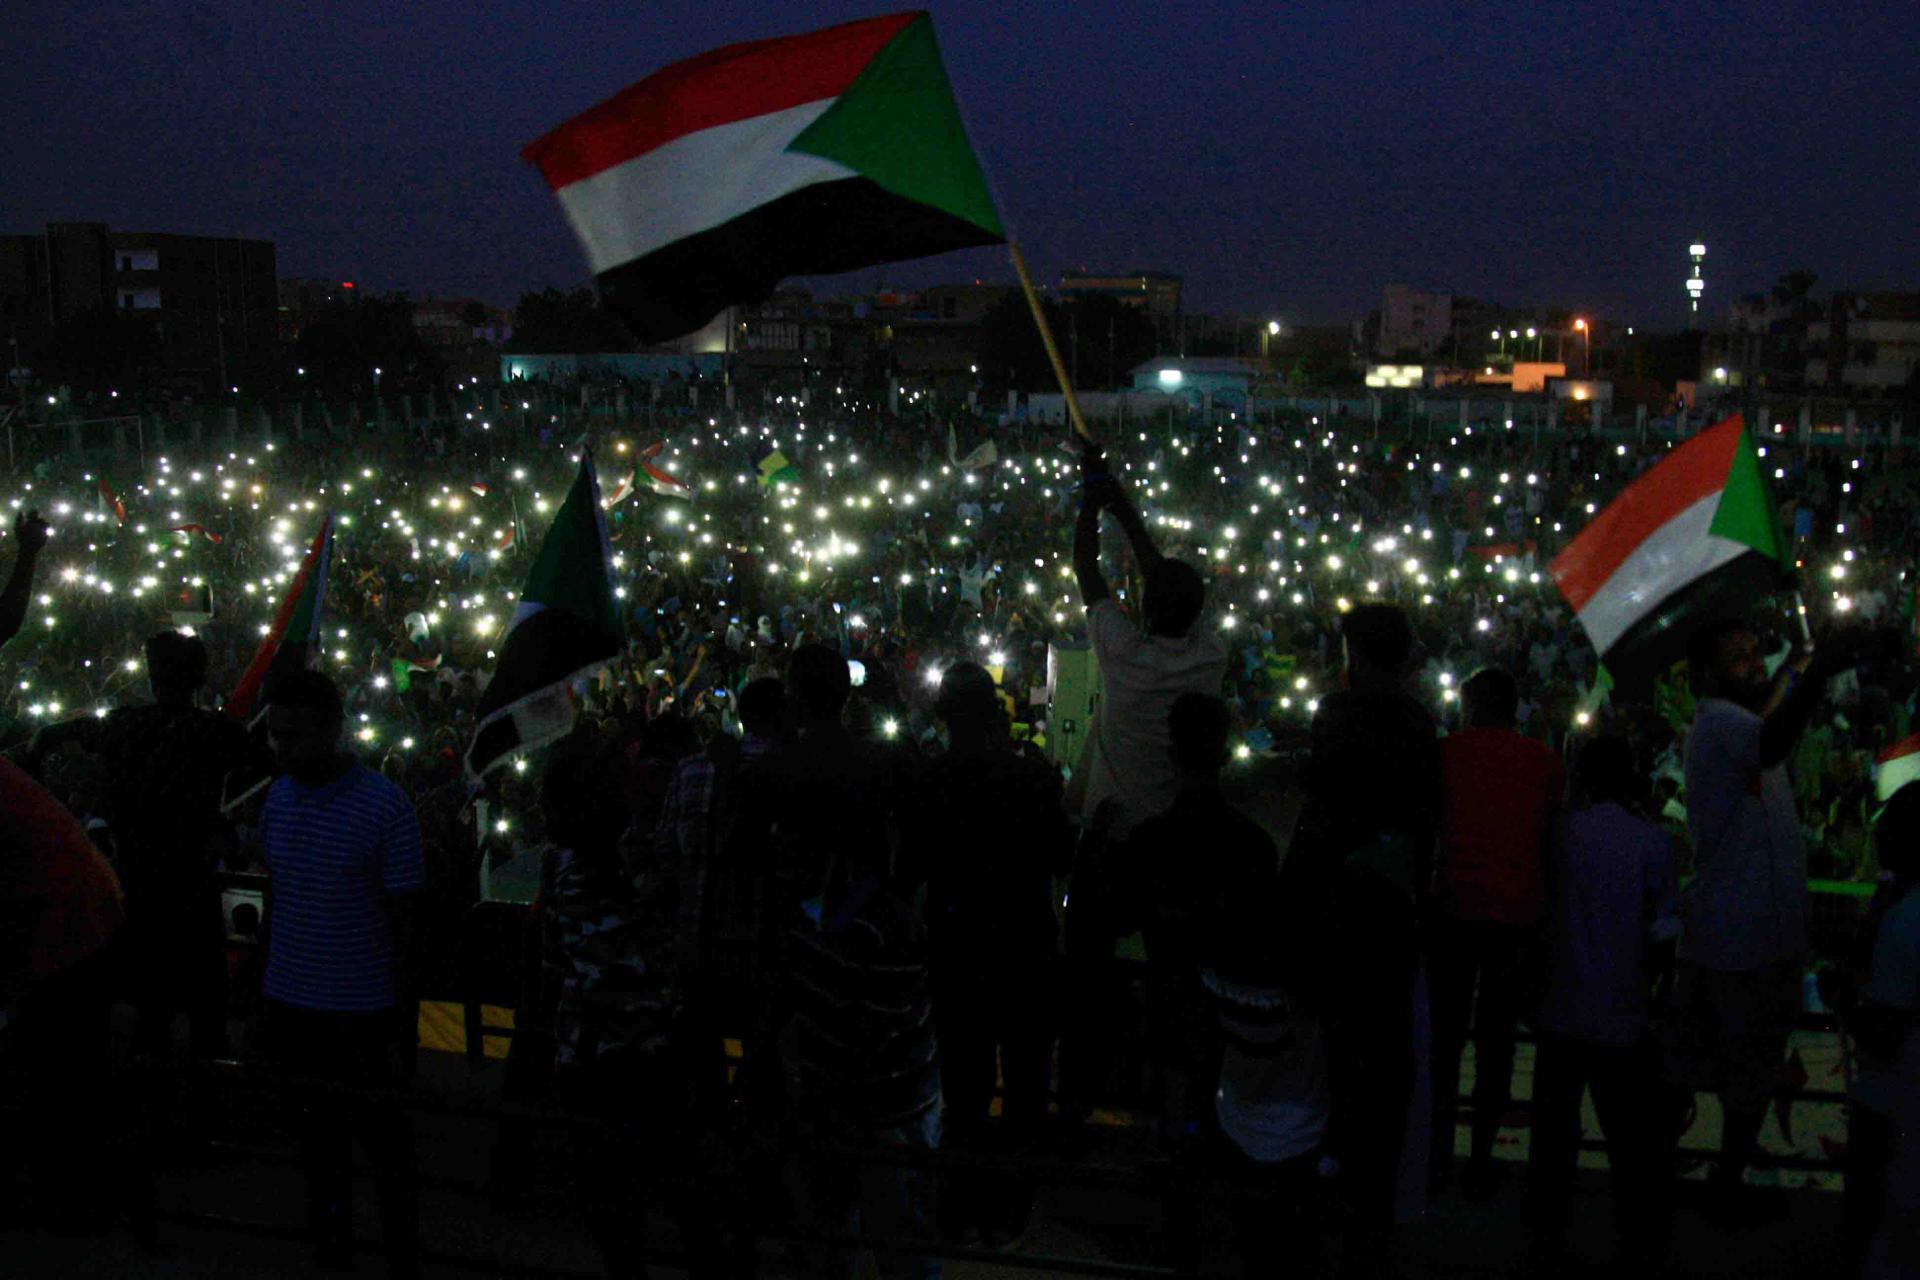 Groups of protesters sat in circles around Sudanese flags and candles in several neighbourhoods as the sun set over Khartoum.